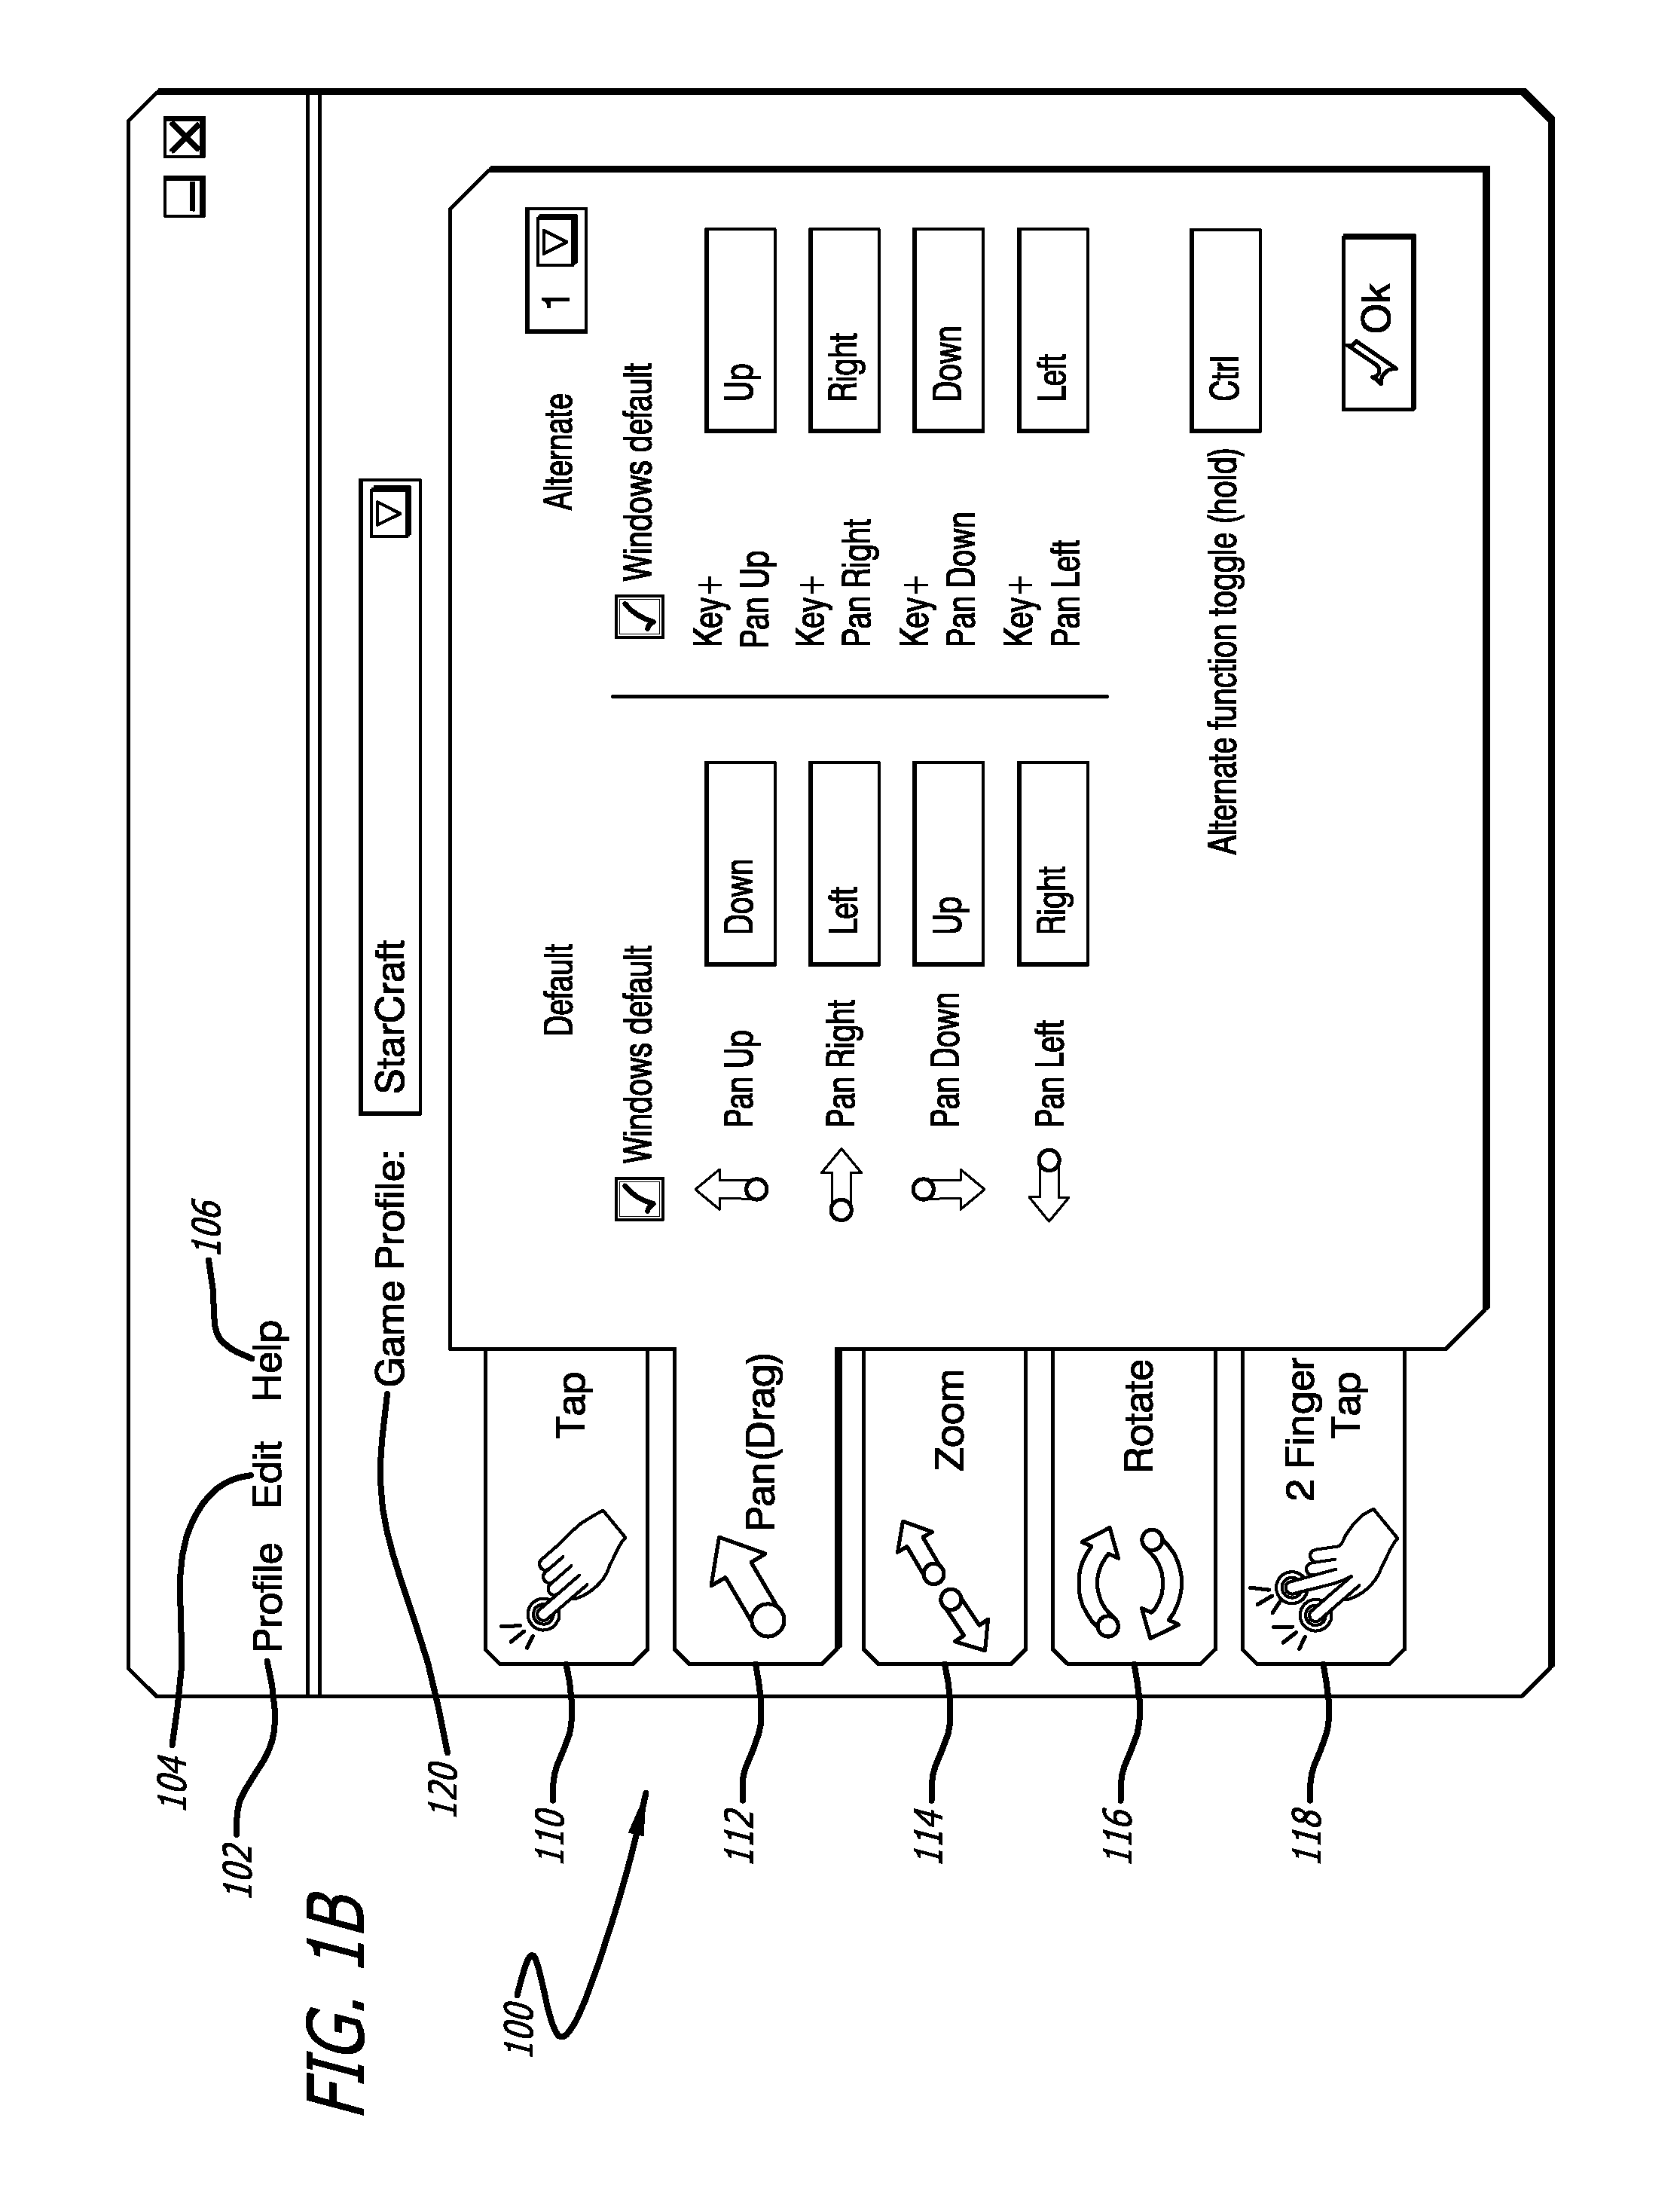 Method and System of Implementing Multi-Touch Panel Gestures in Computer Applications Without Multi-Touch Panel Functions